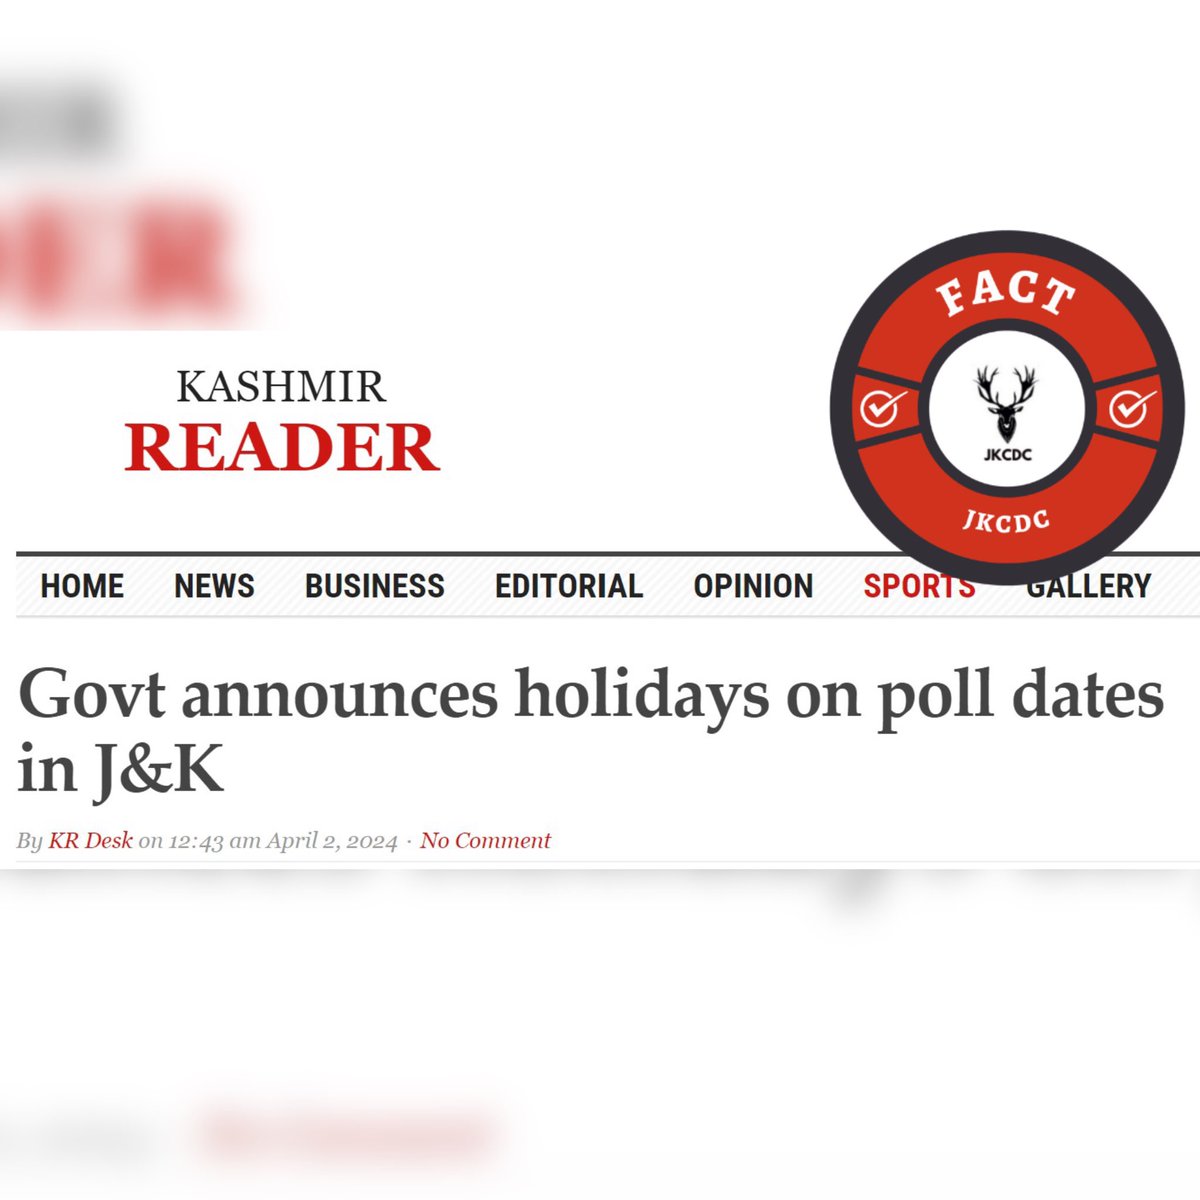 In response to video posted by @khanumarfa with the misleading claim that, “99% shops are closed in Srinagar without any formal orders” #Fact: This claim is misleading. J&K administration has announced public holiday on poll dates in the UT’s 05 parliamentary constituencies 1/3